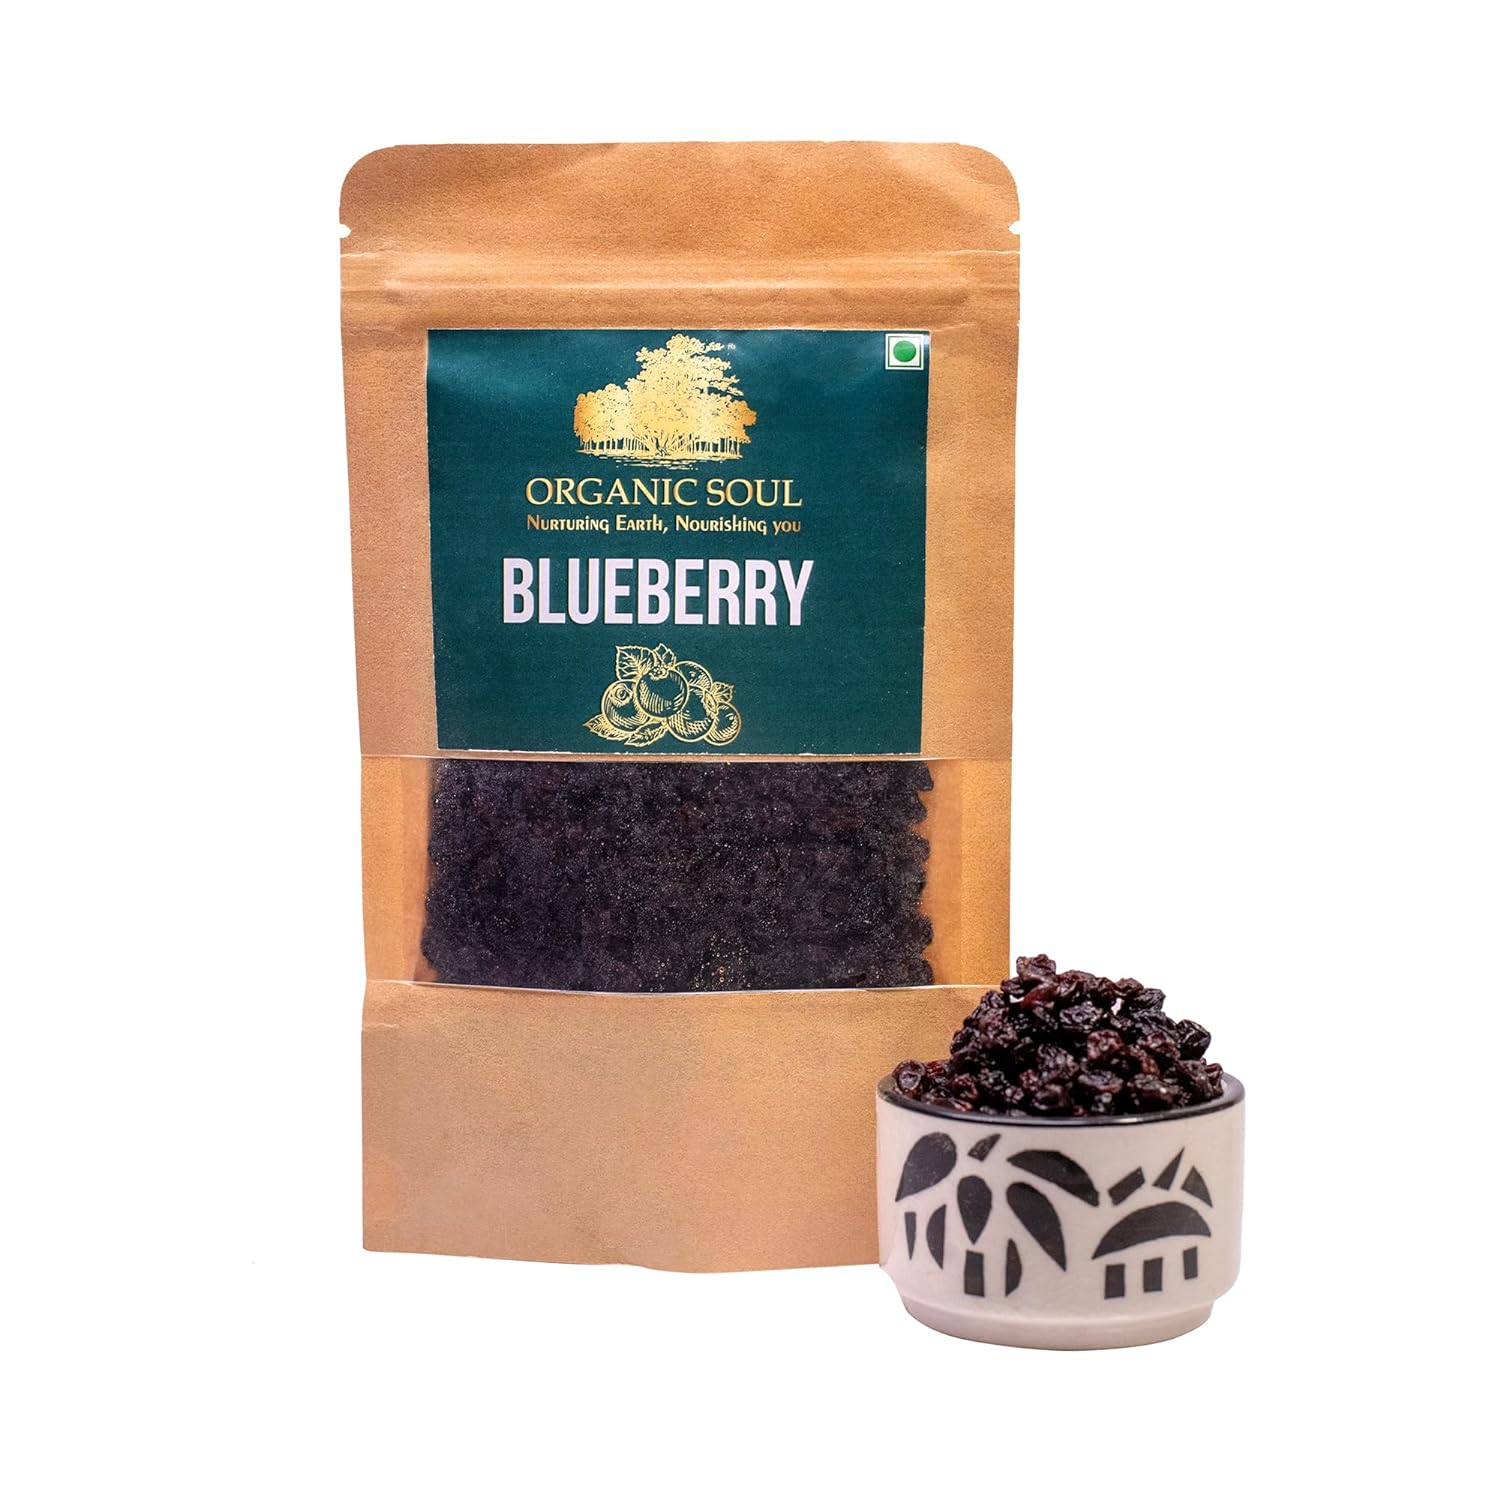 Blueberry – Dry Fruits 100g